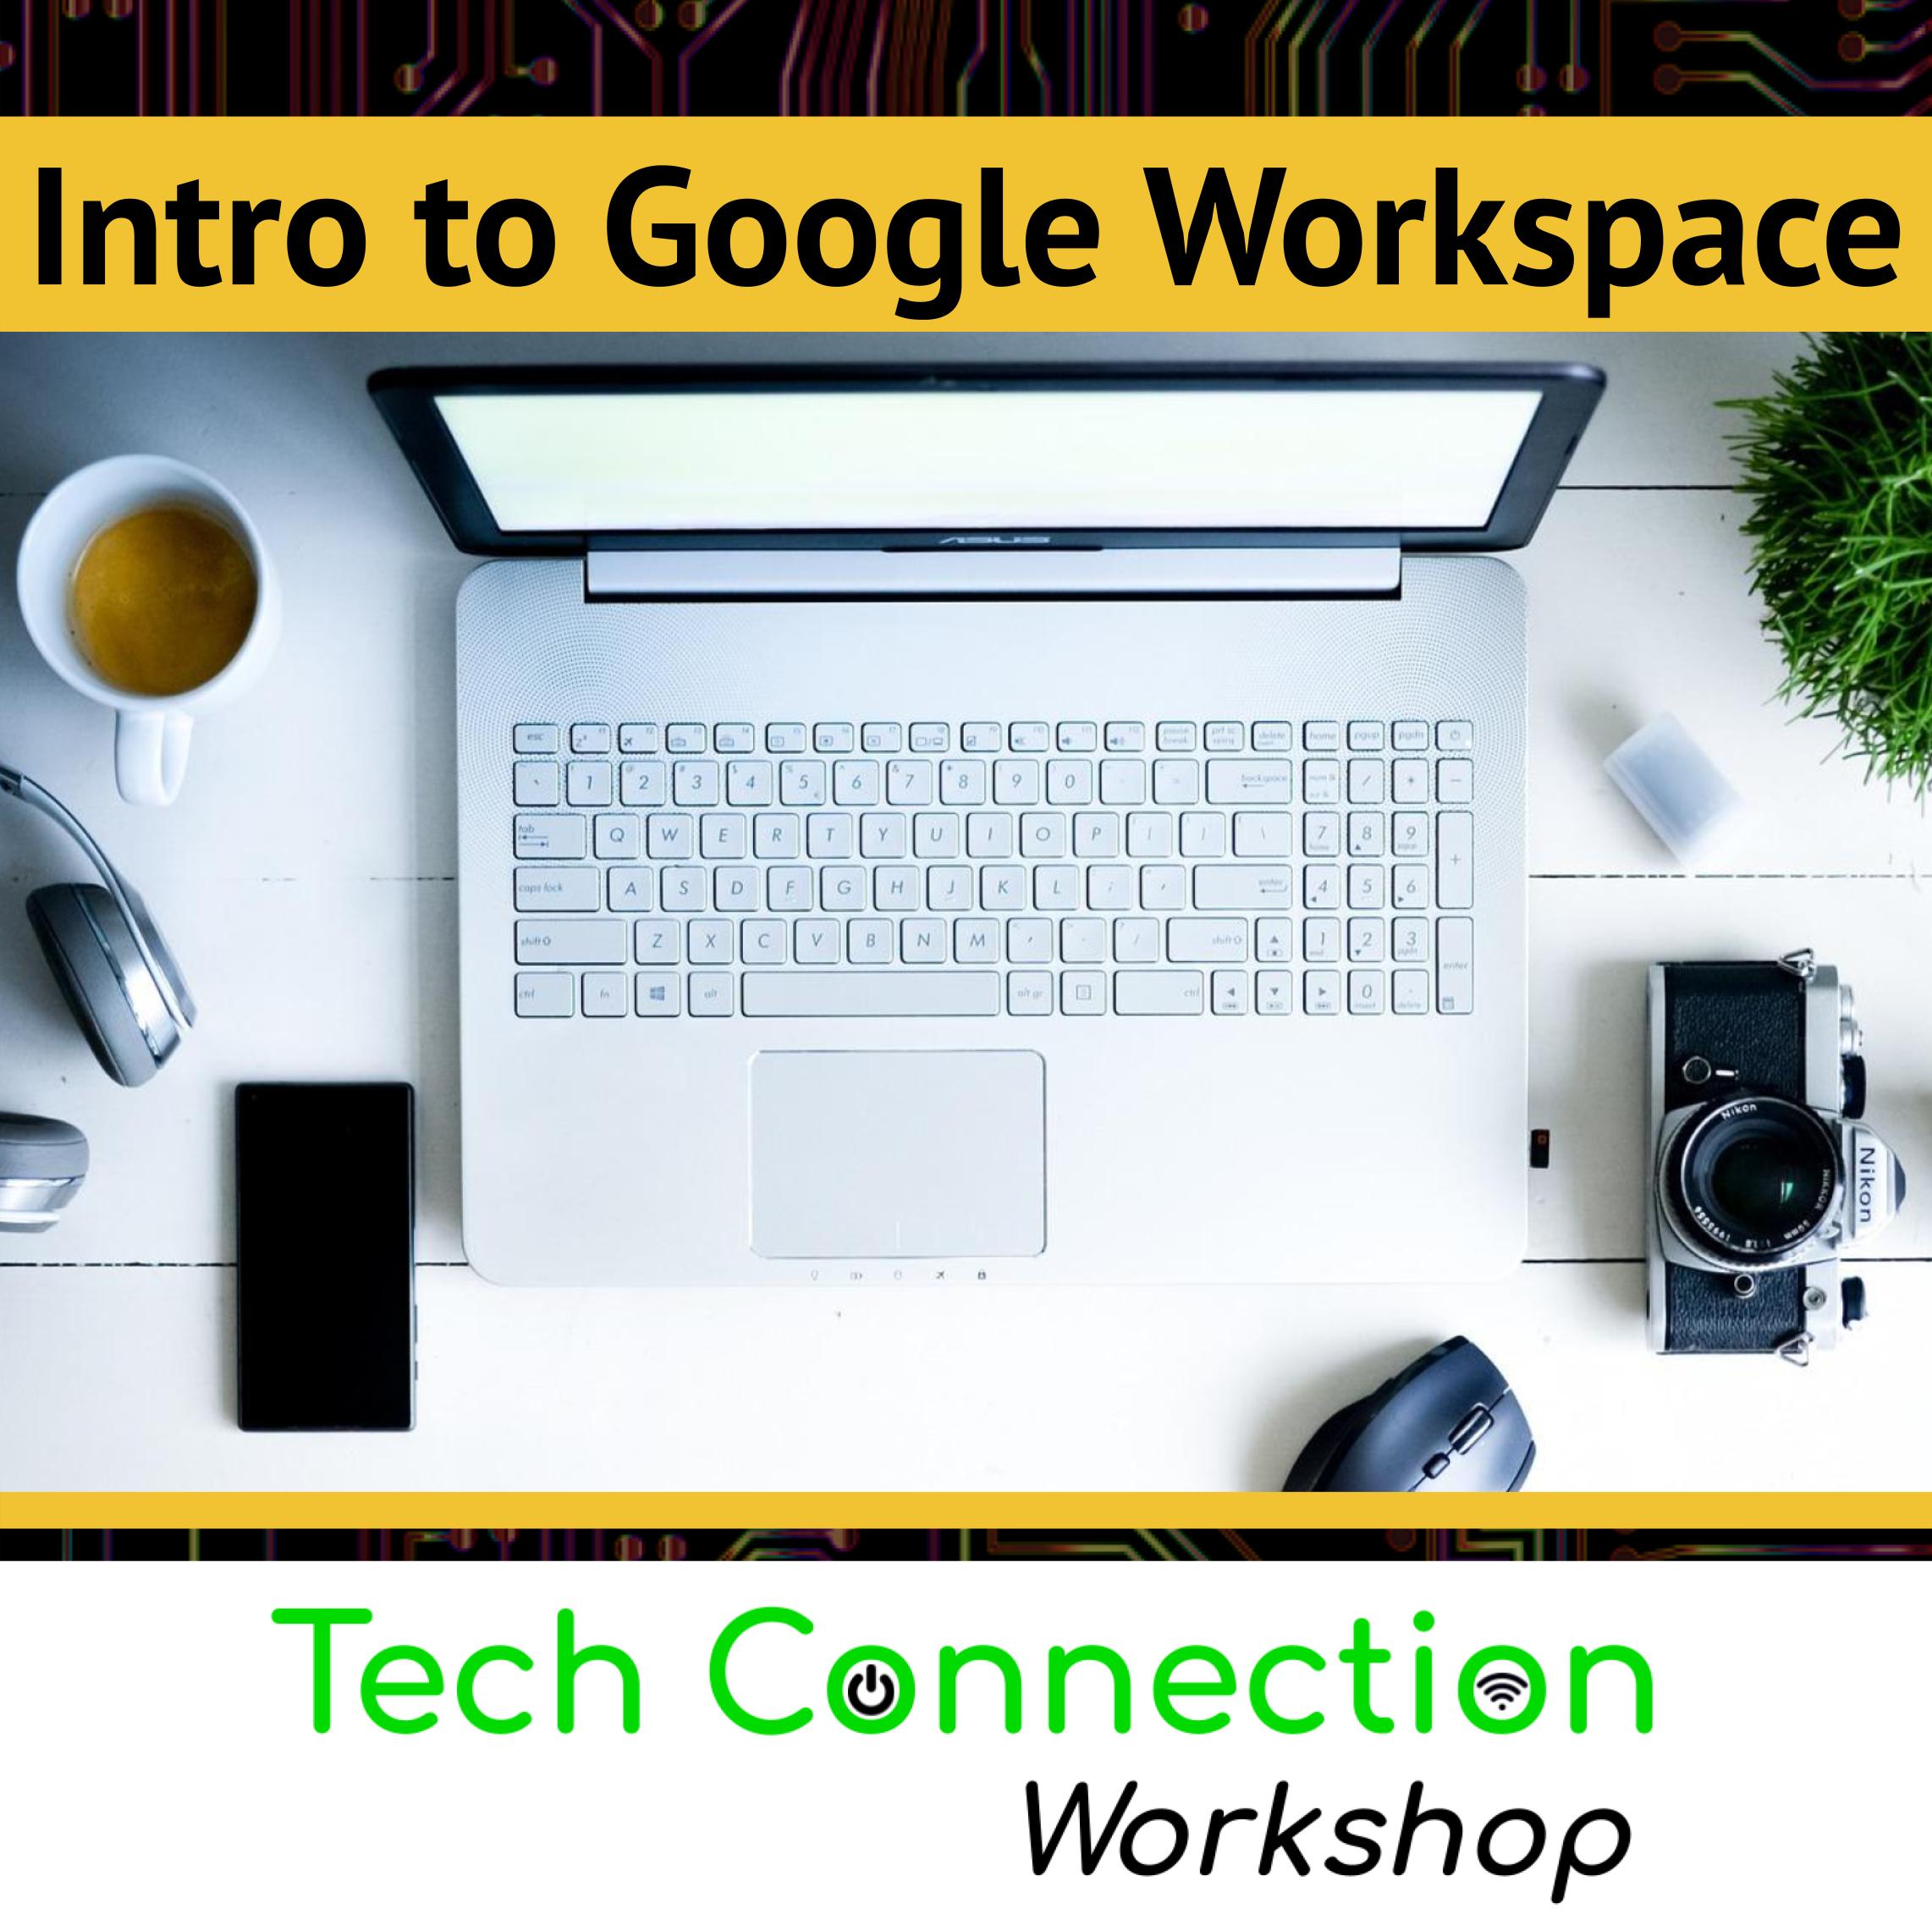 Tech Connection Workshop: Intro to Google Workspace